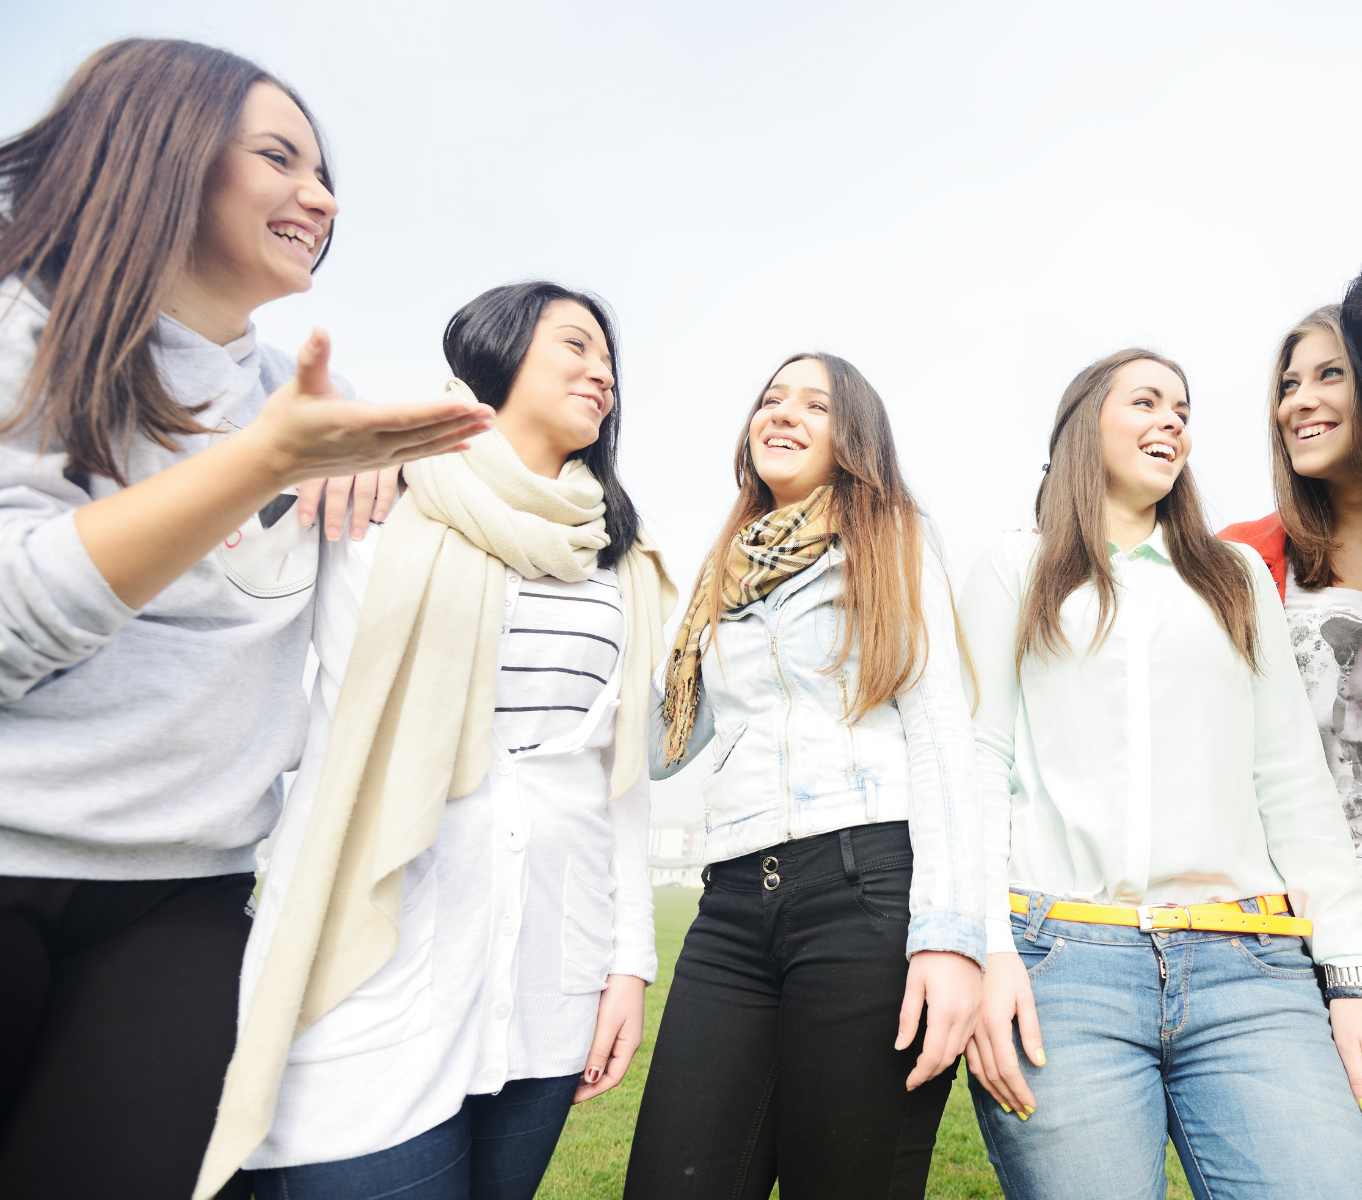 A group of popular tween and teen girls gather outside and laugh.